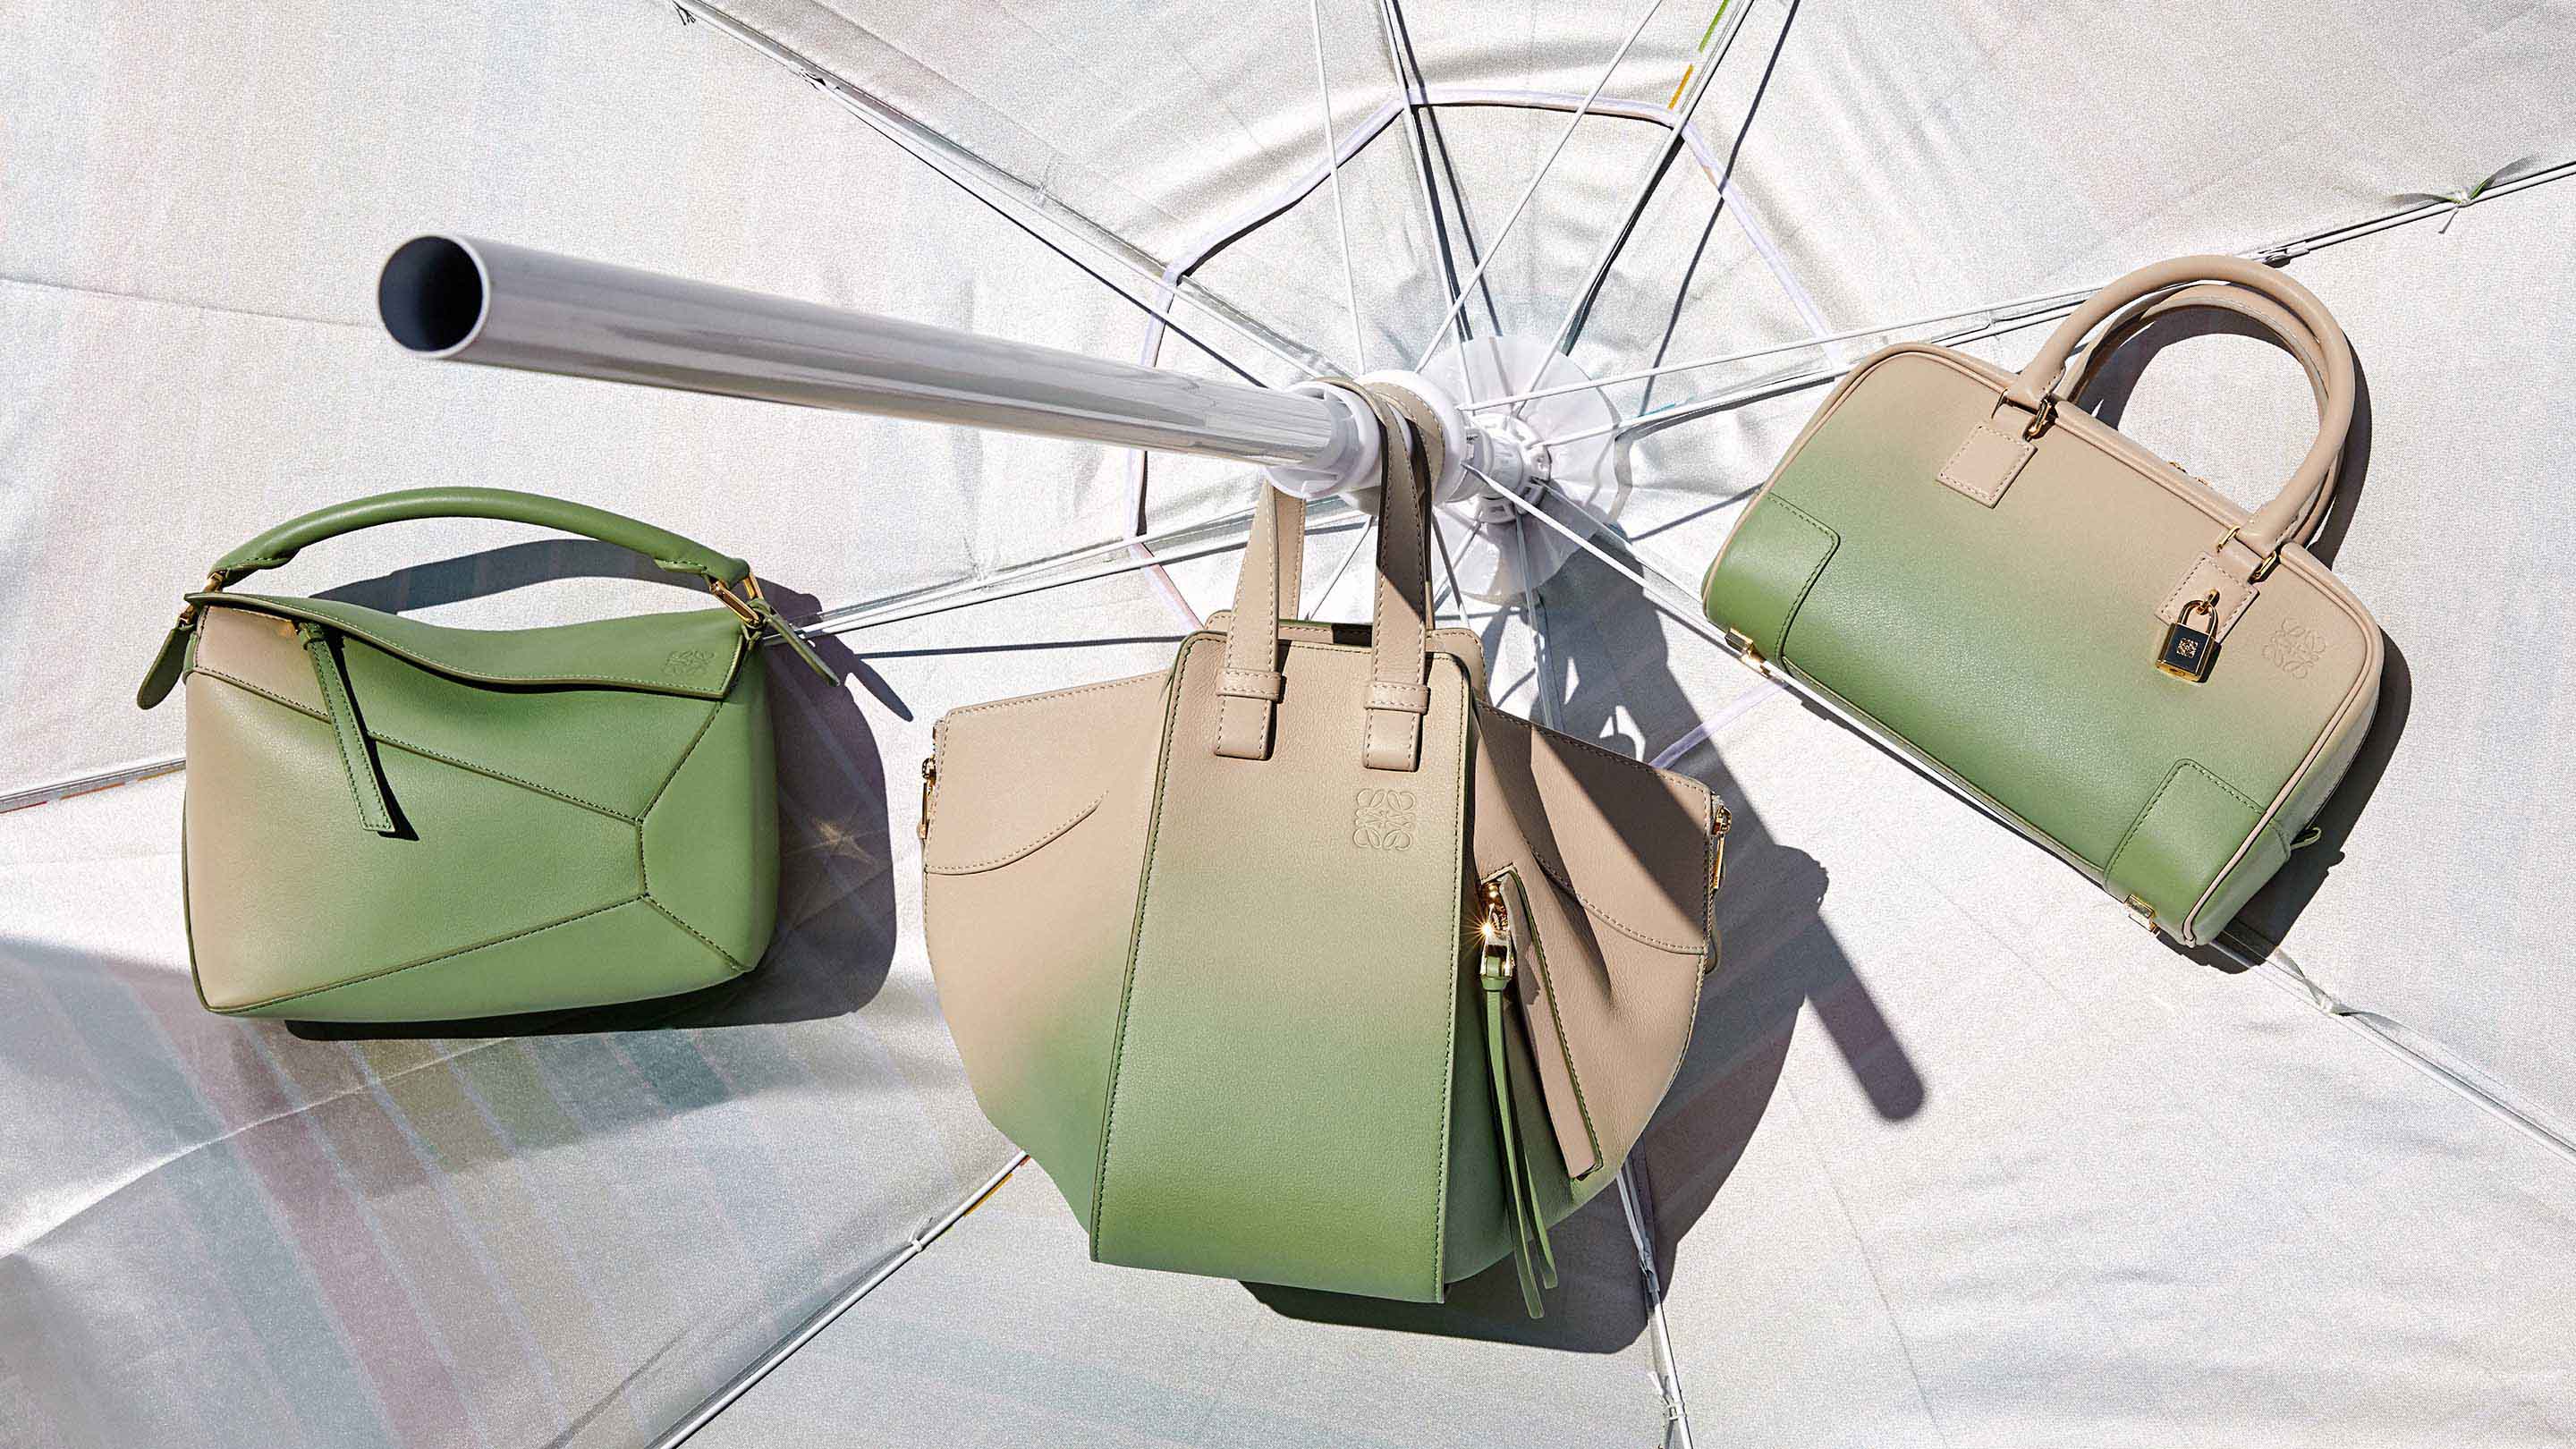 LOEWE | reinventing craft and leather